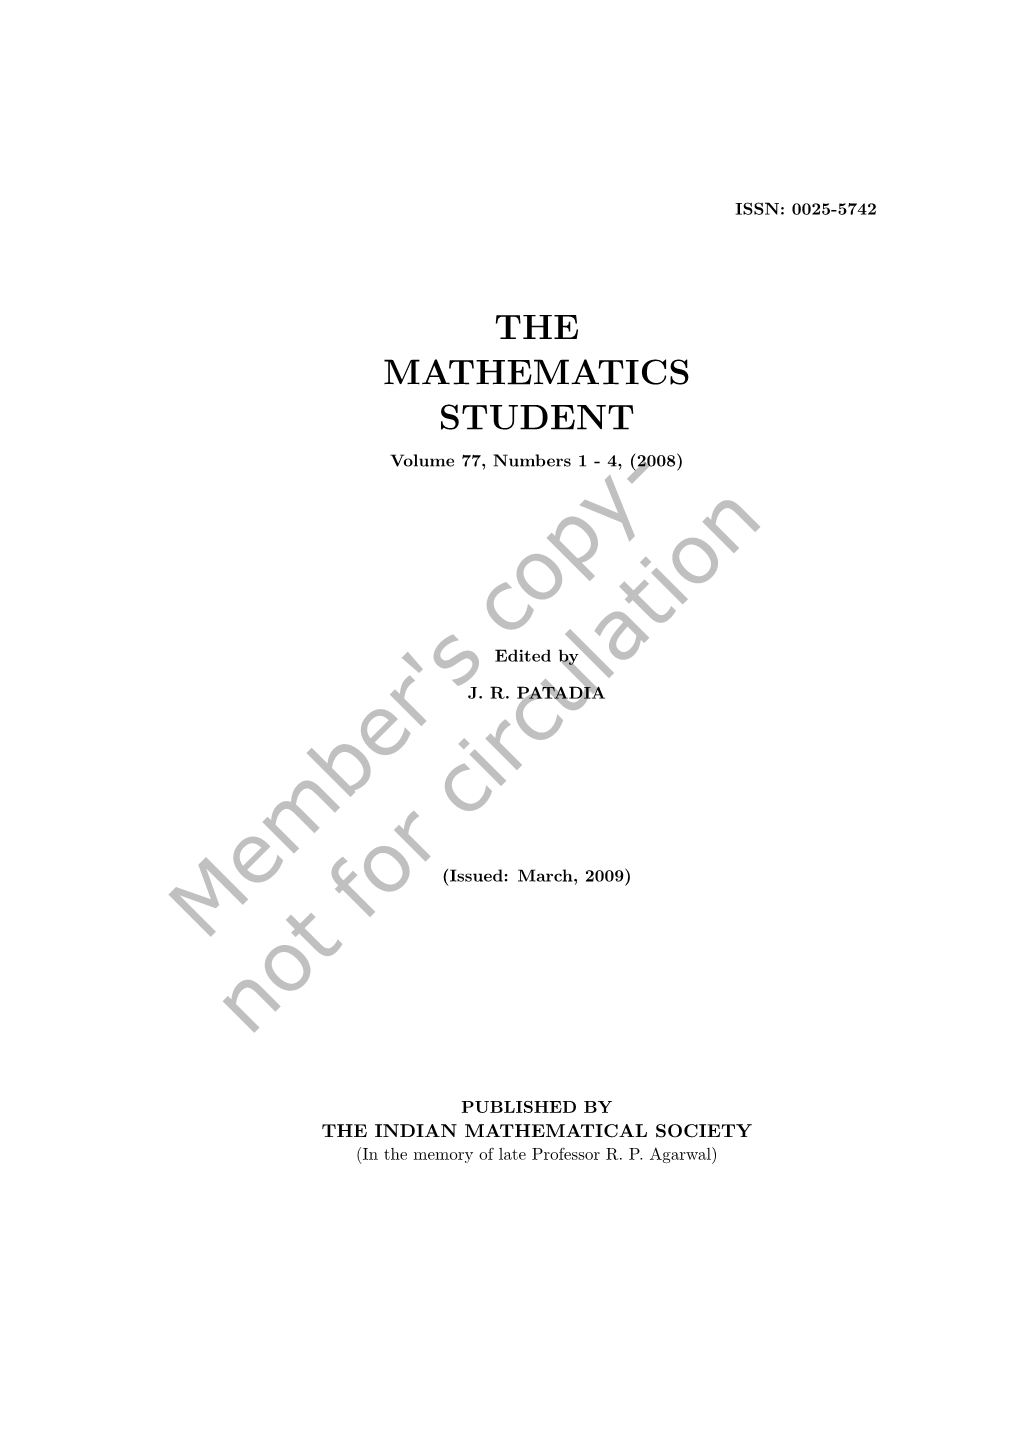 Member's Copy- Not for Circulation